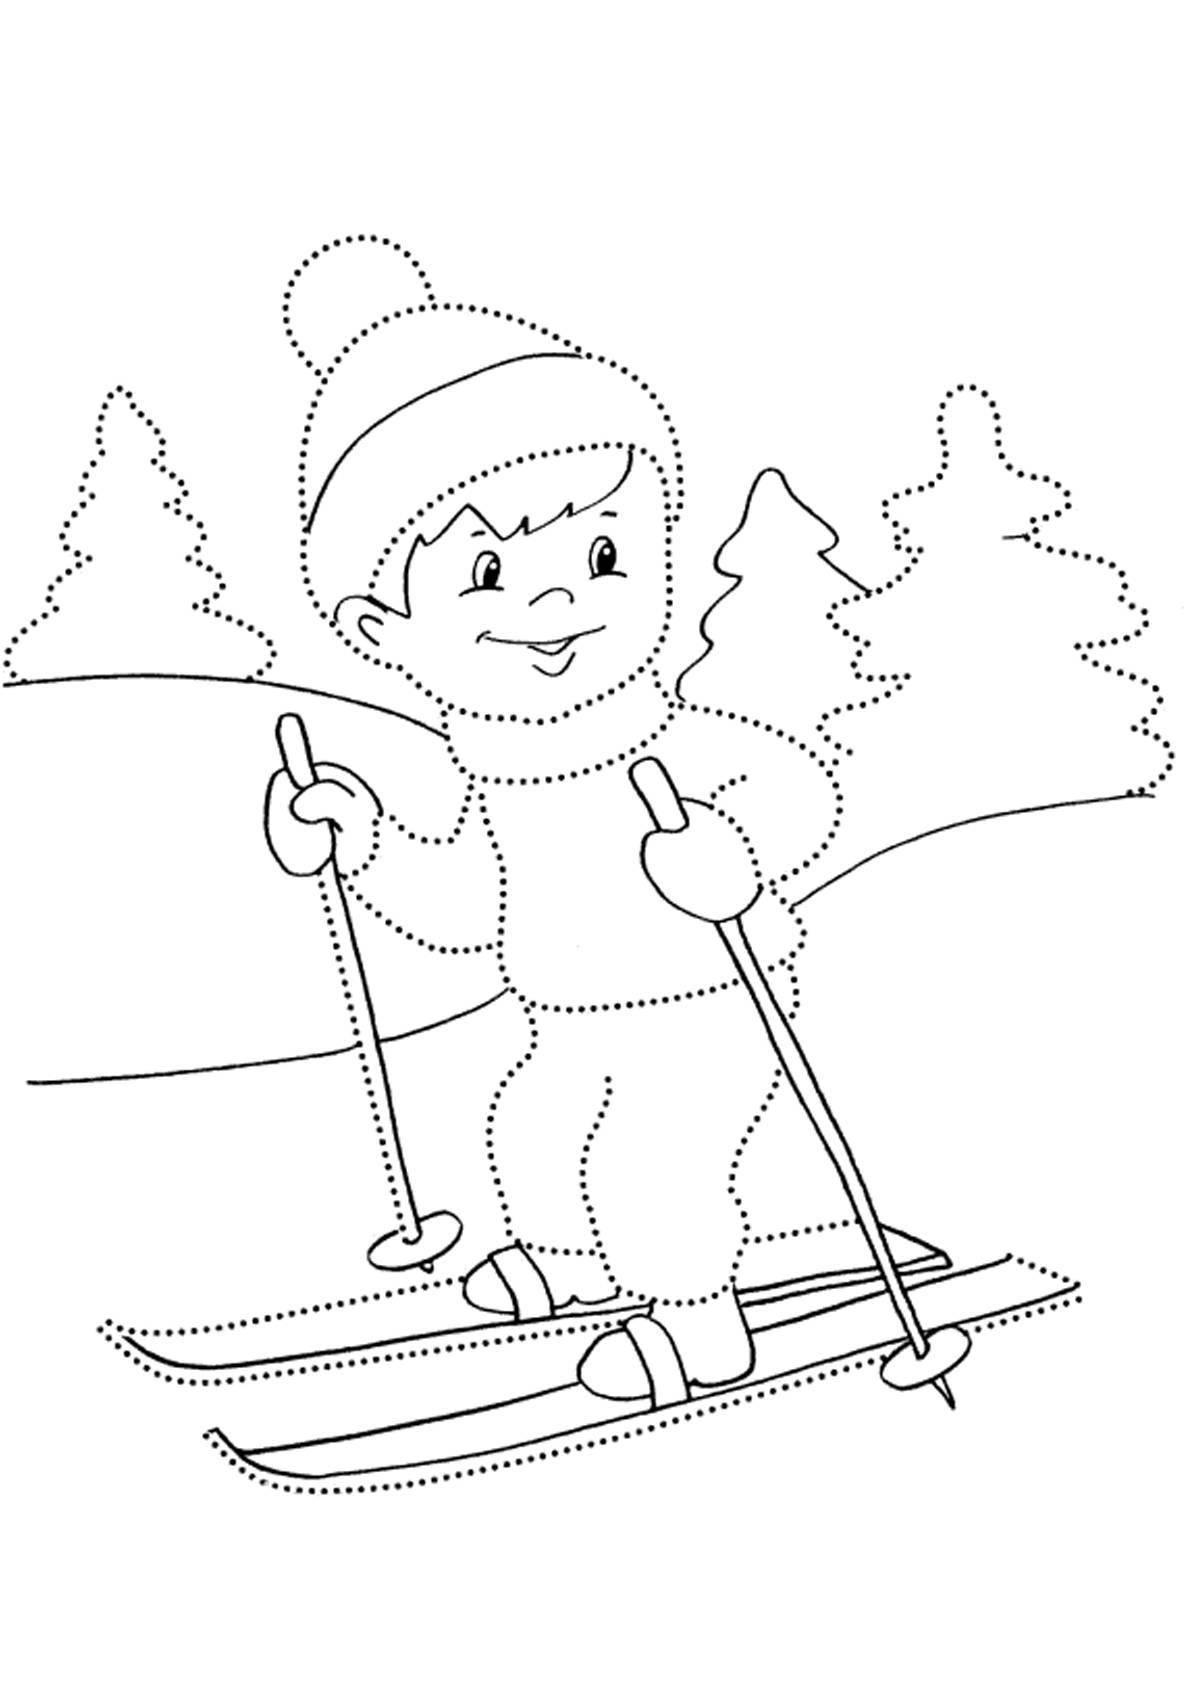 Coloring book winter sports for preschoolers